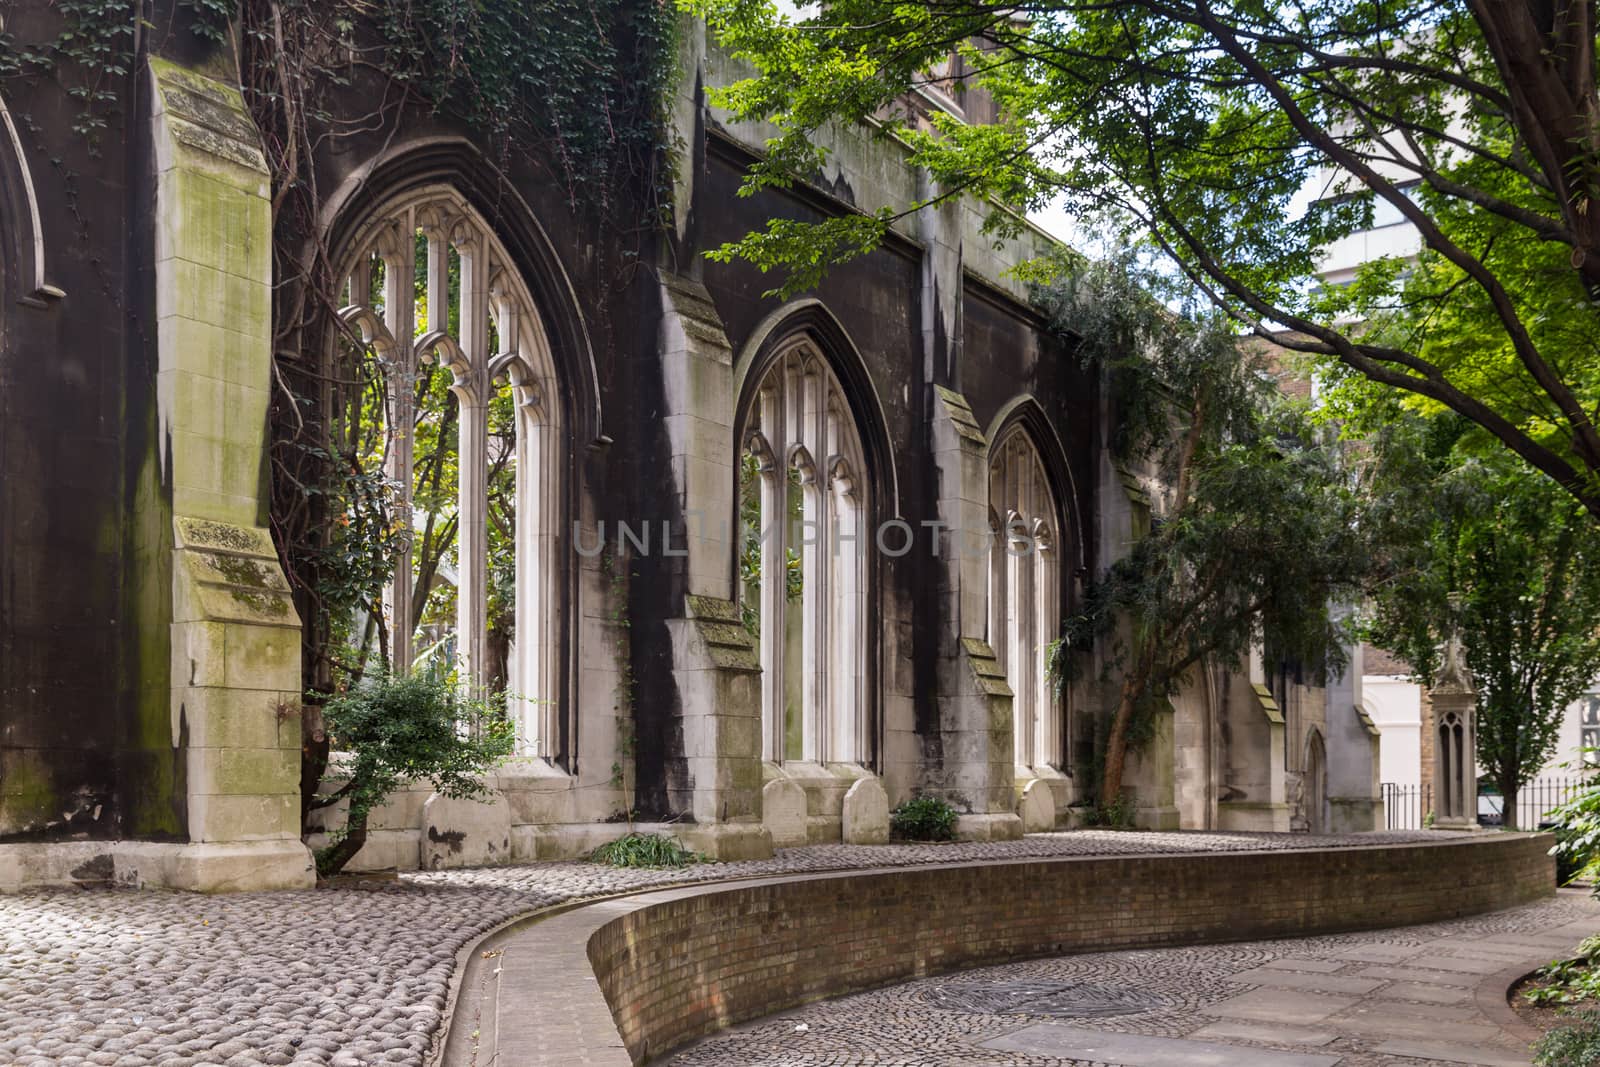 Old ruins remaining in the centre of London - open to the public with free access